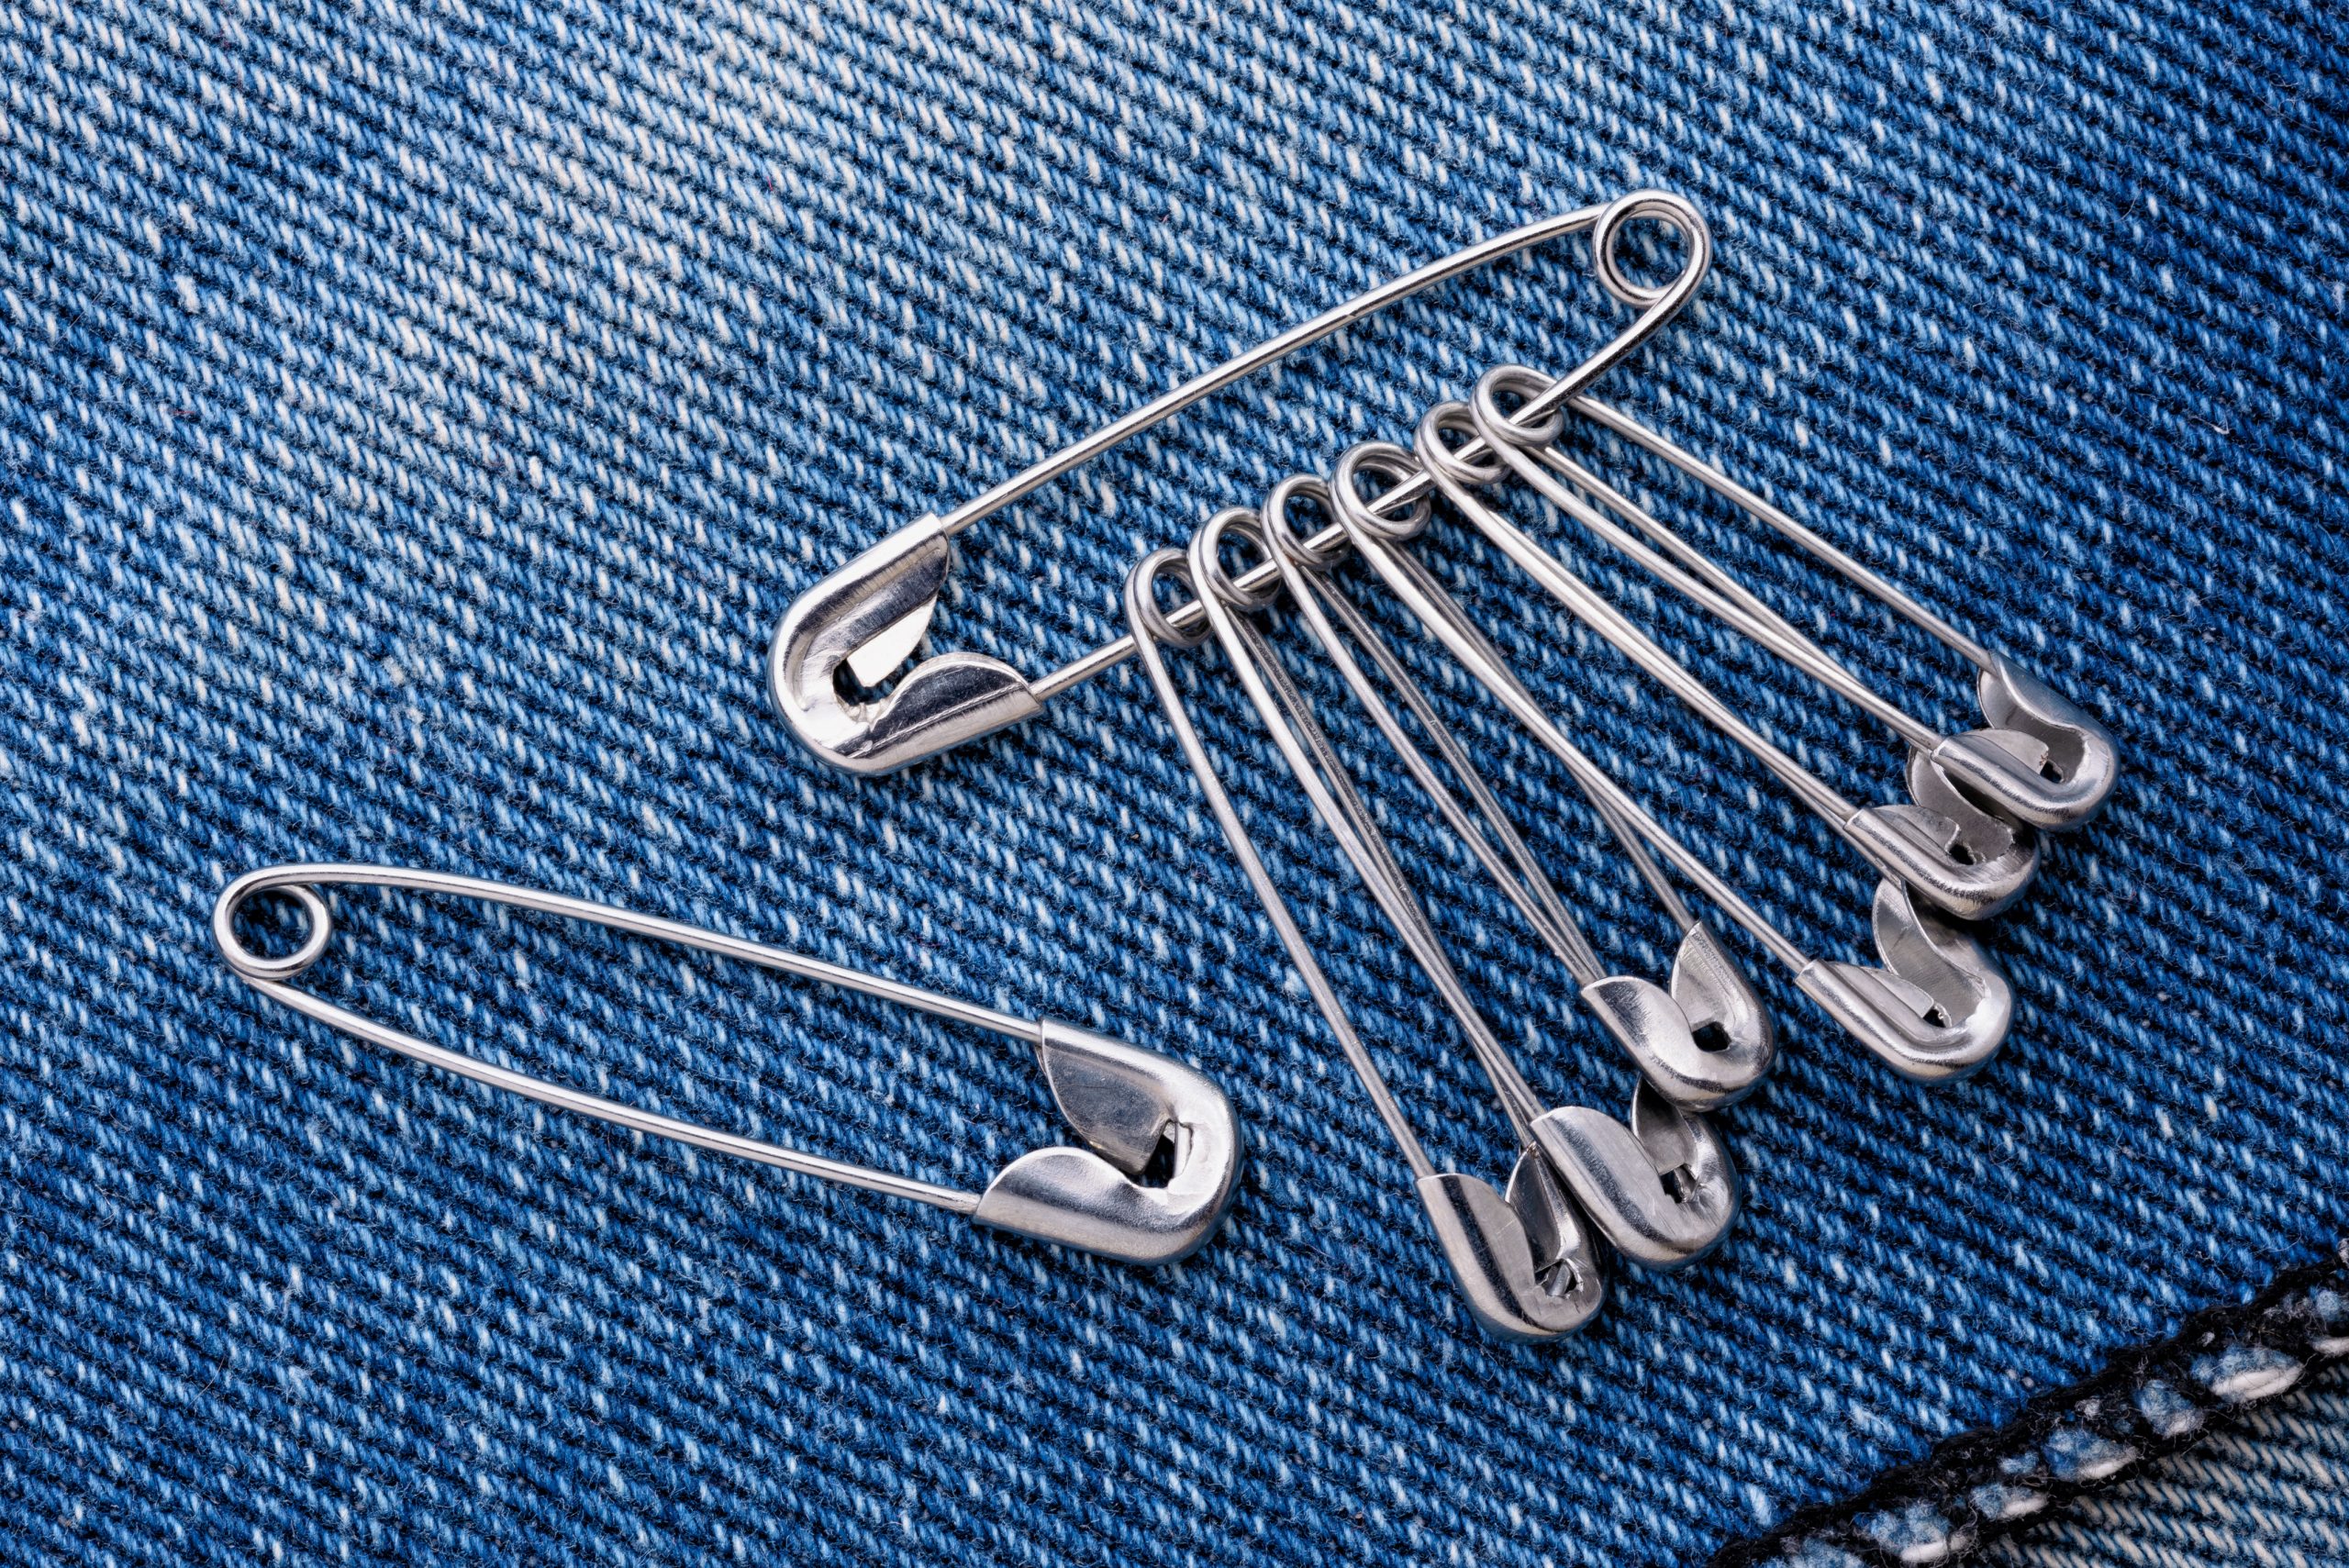 5 PCS Stainless Steel Safety Pins Large, Large Safety Pins, 5 inch Safety  Pins, Silver Huge